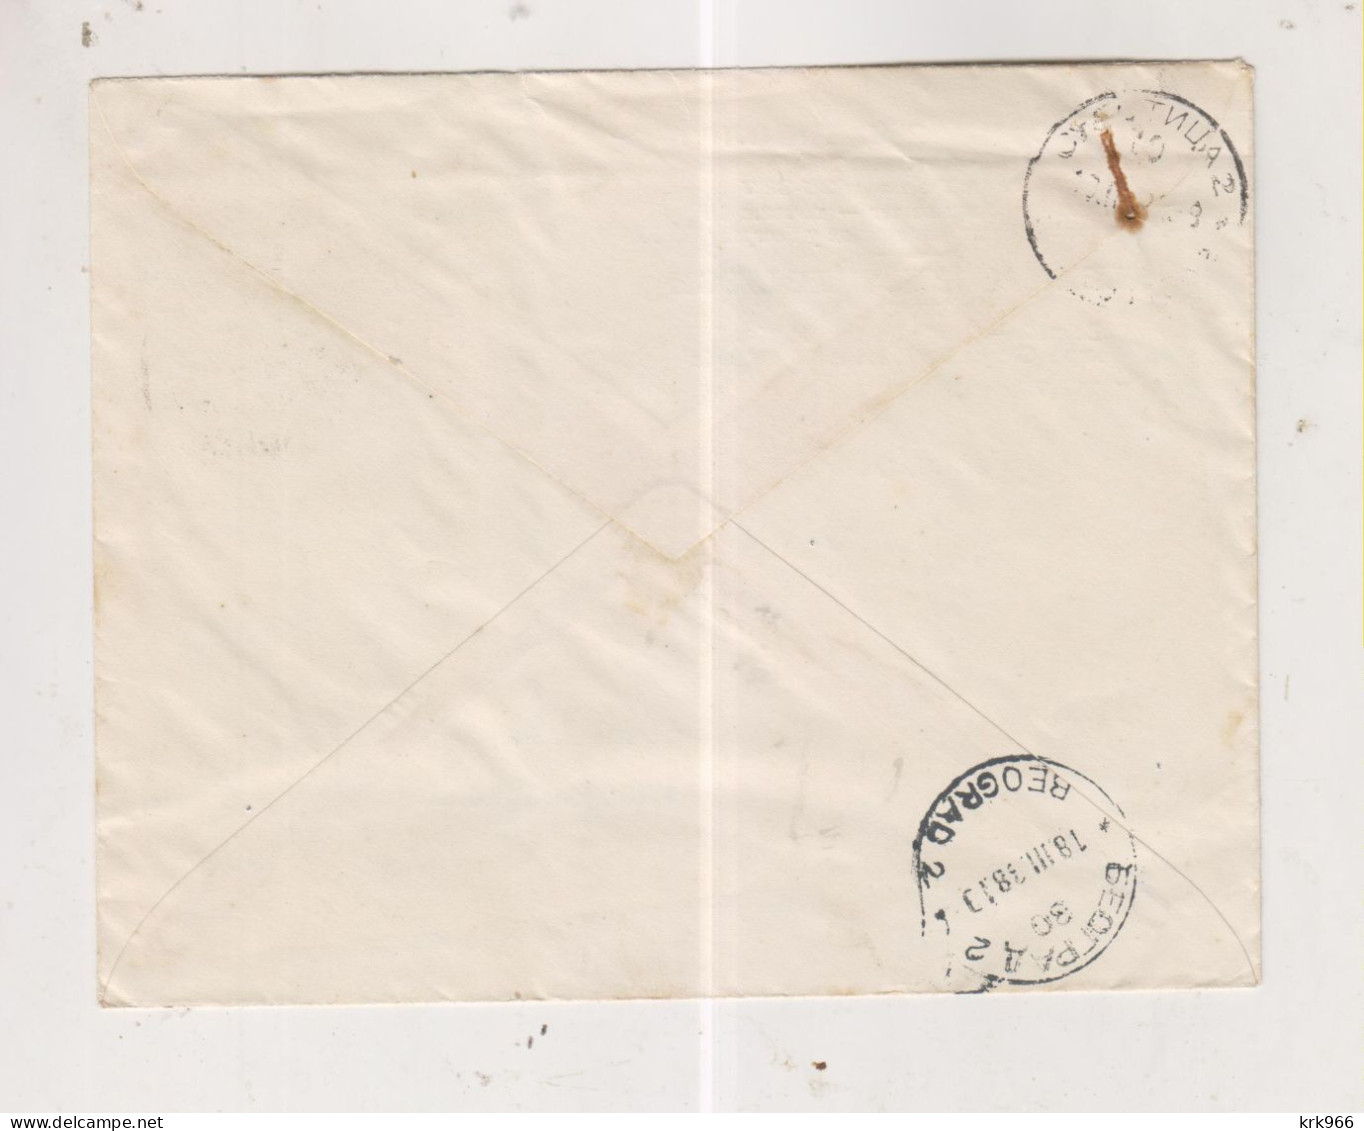 YUGOSLAVIA,1938 BEOGRAD Registered Cover To Subotica Returned - Lettres & Documents